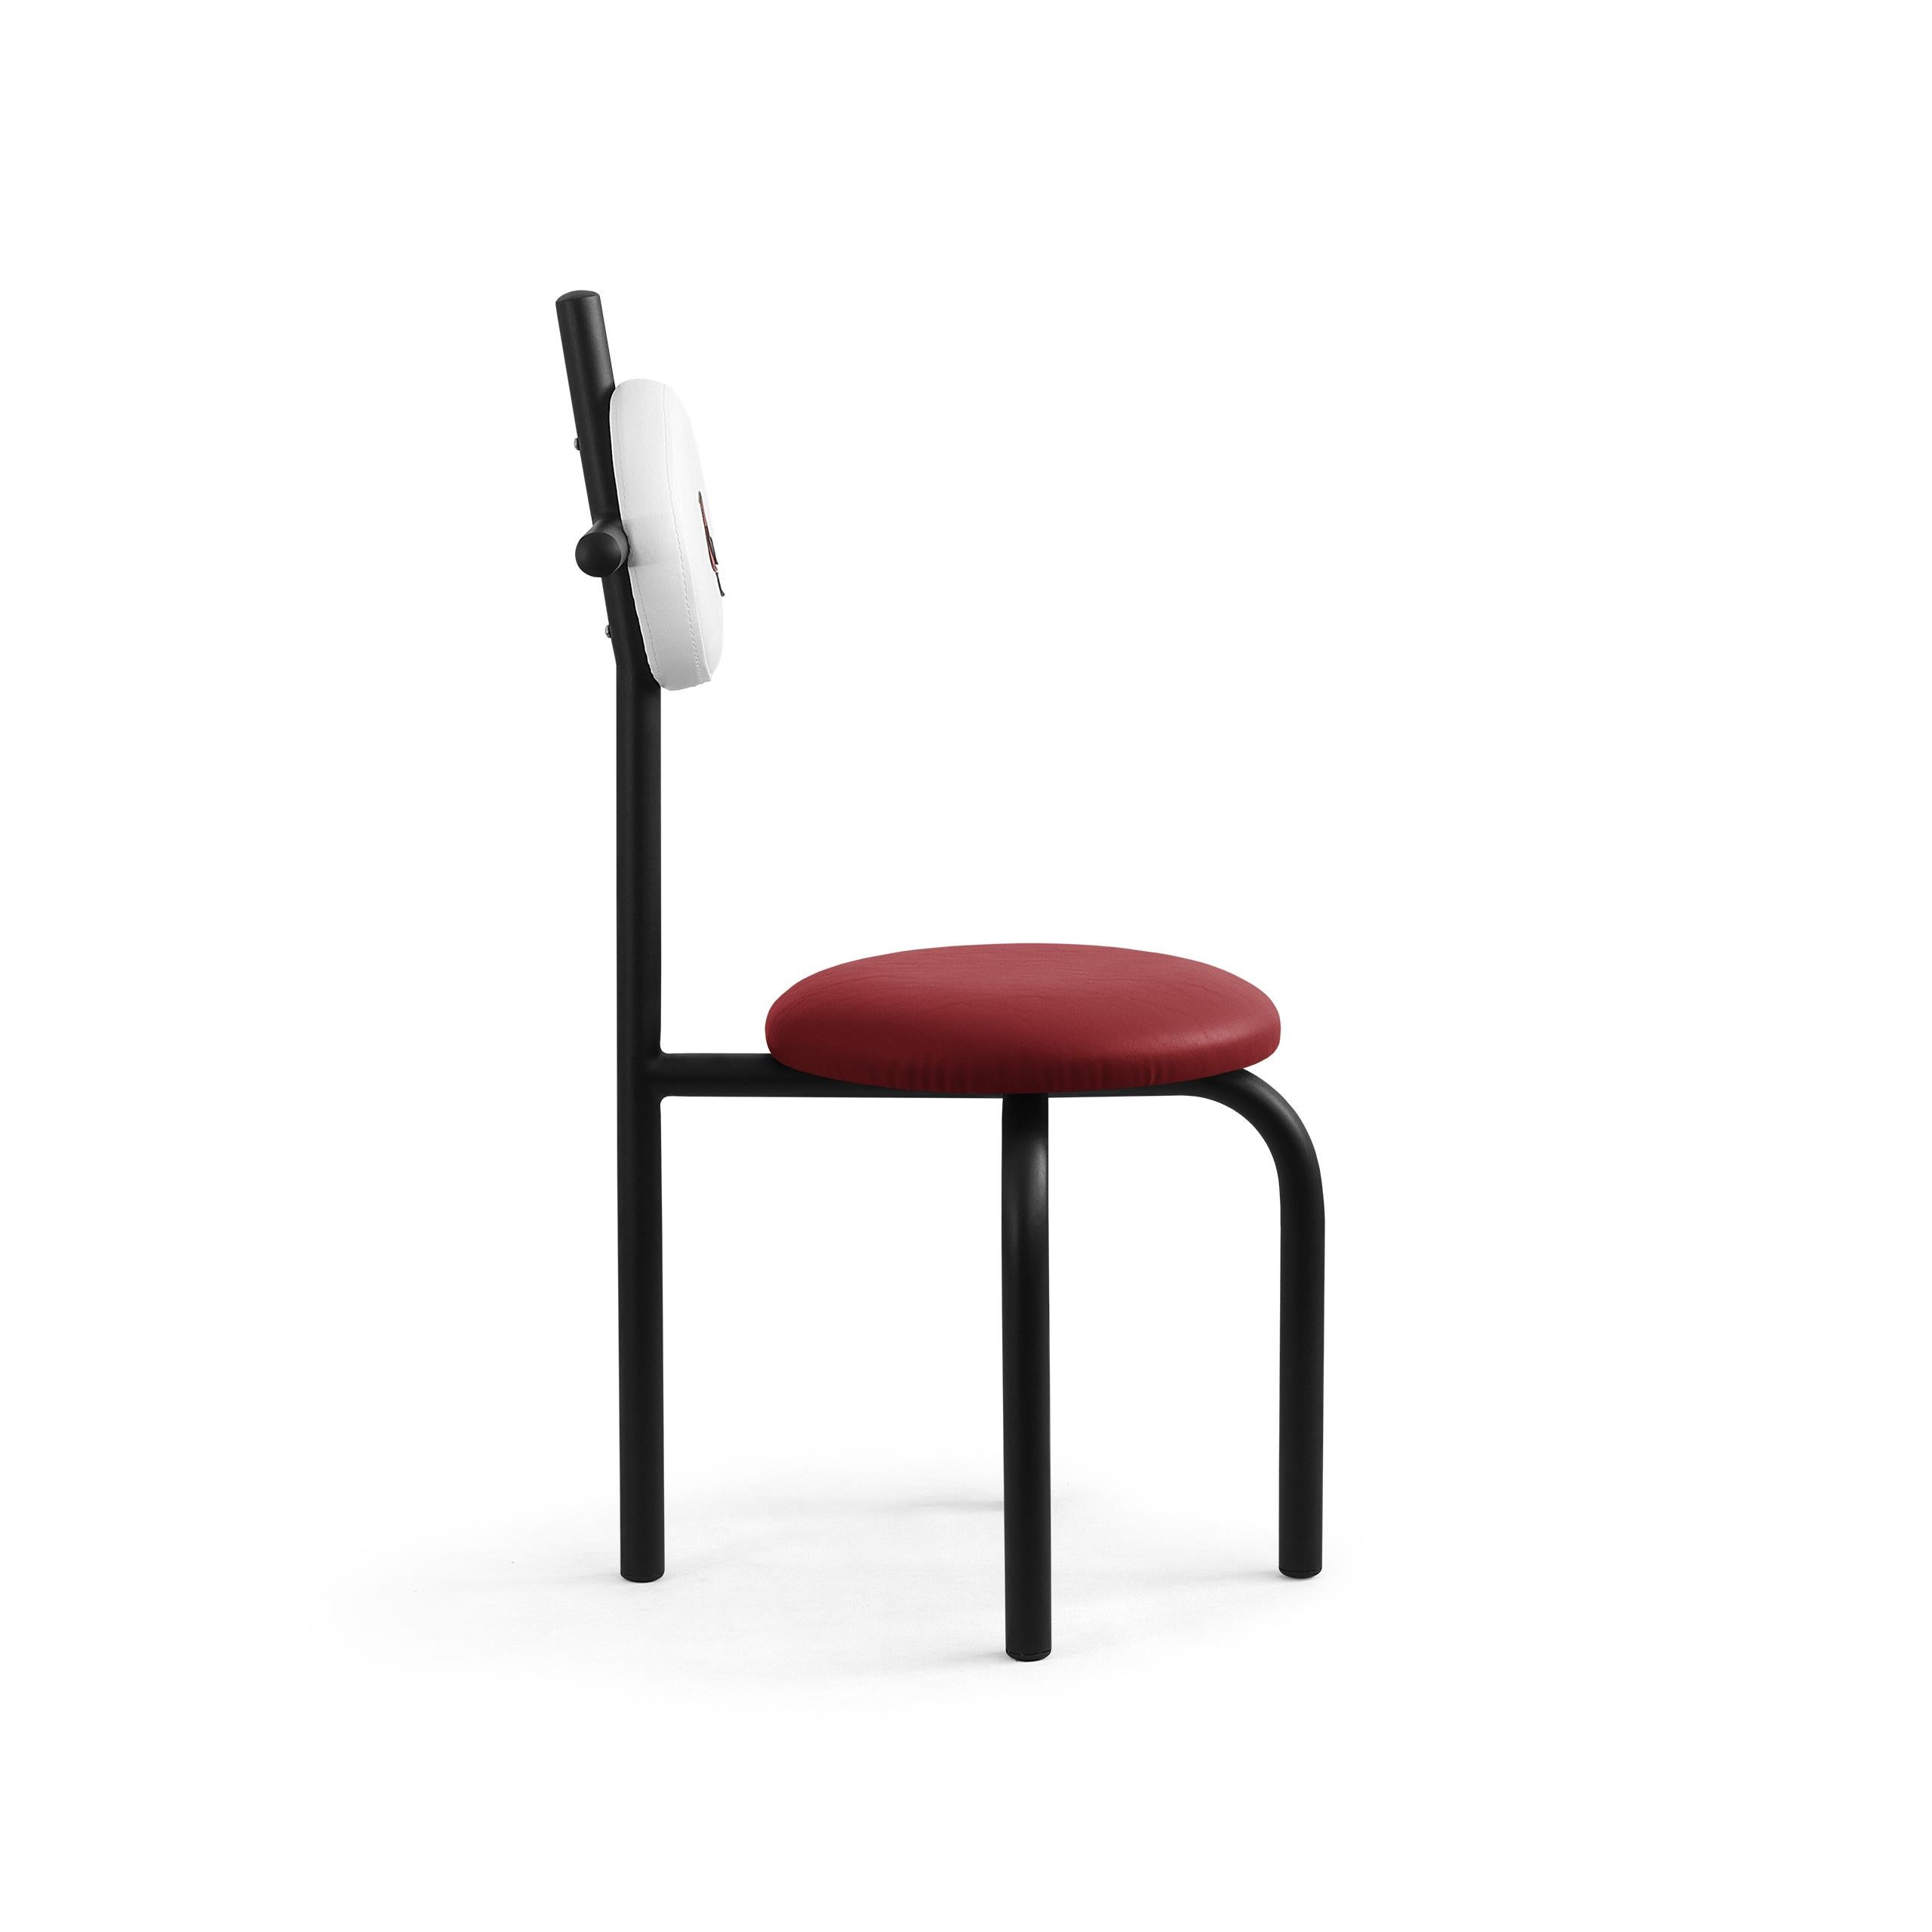 Brazilian PK16 Impermeable Chair, Red Seat & Carbon Steel Structure by Paulo Kobylka For Sale